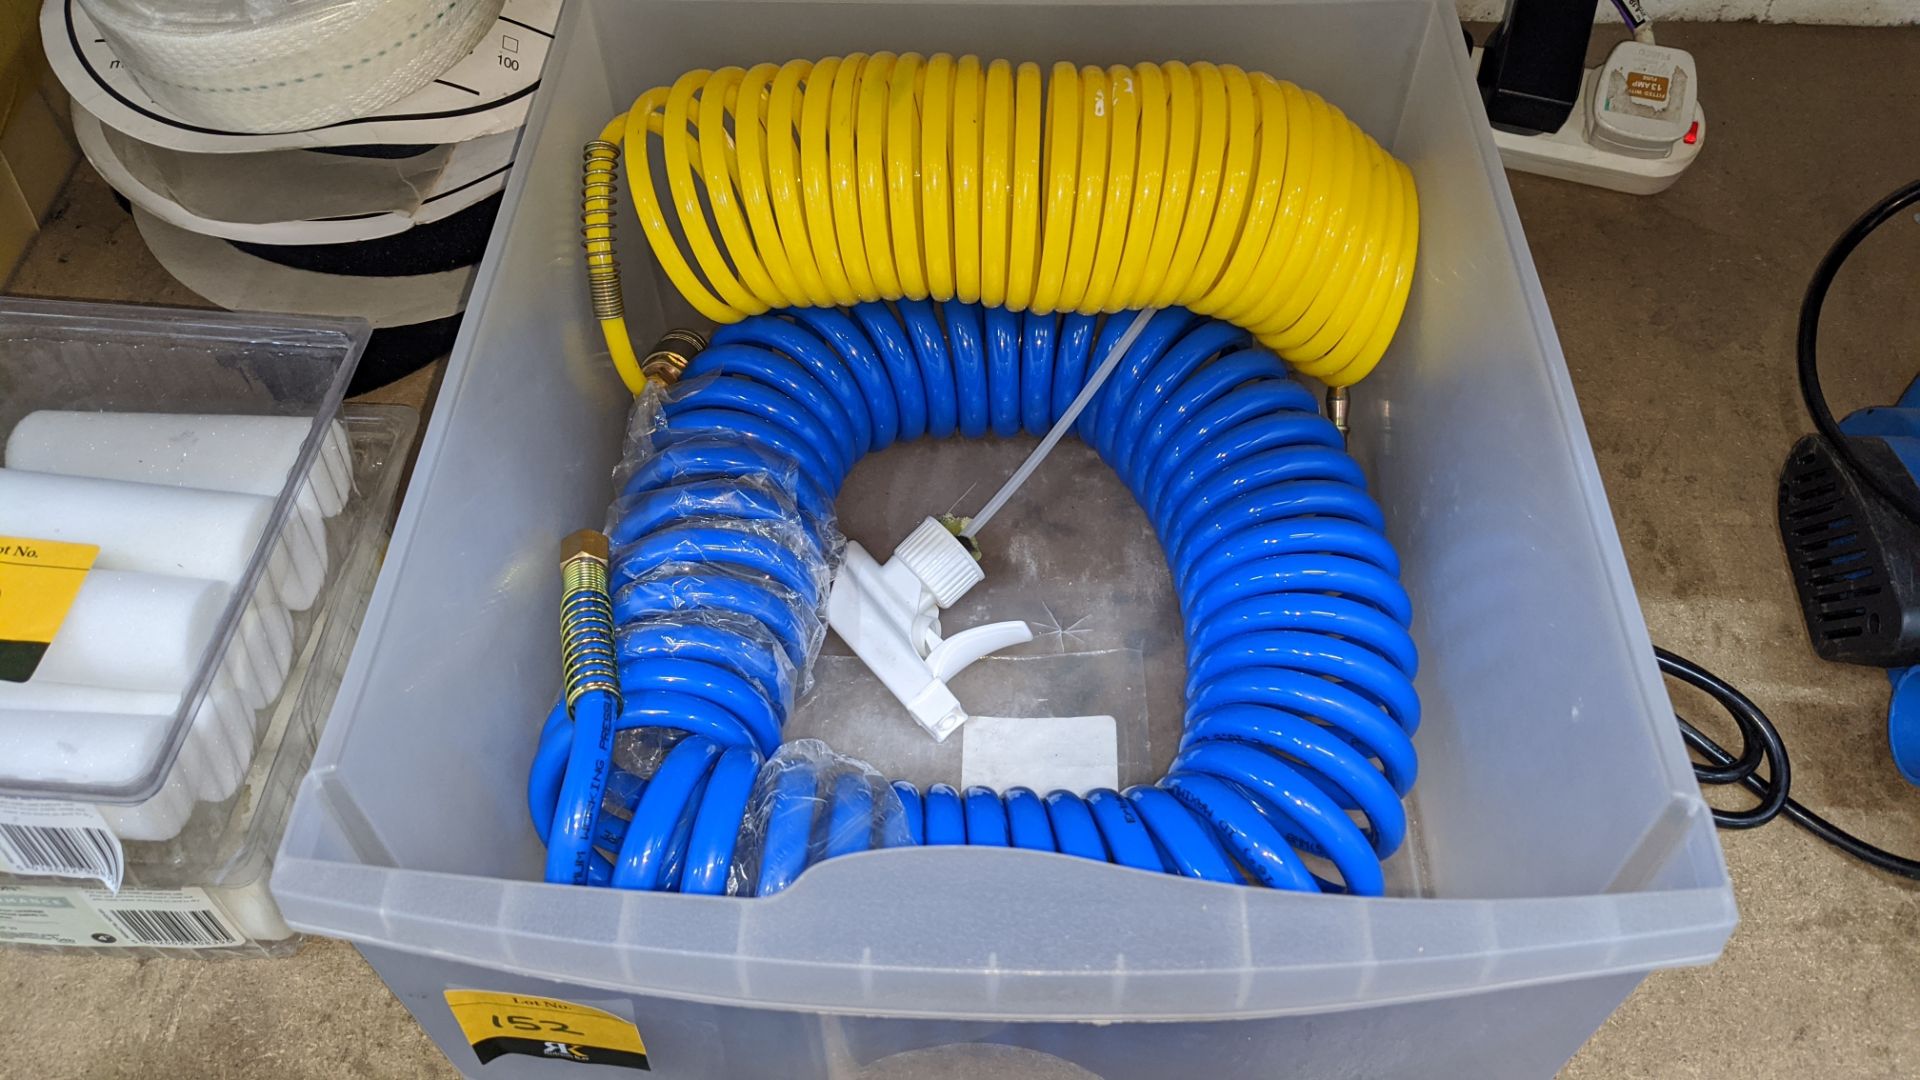 2 off air hose lines. This is one a number of lots being sold on behalf of the liquidator of a